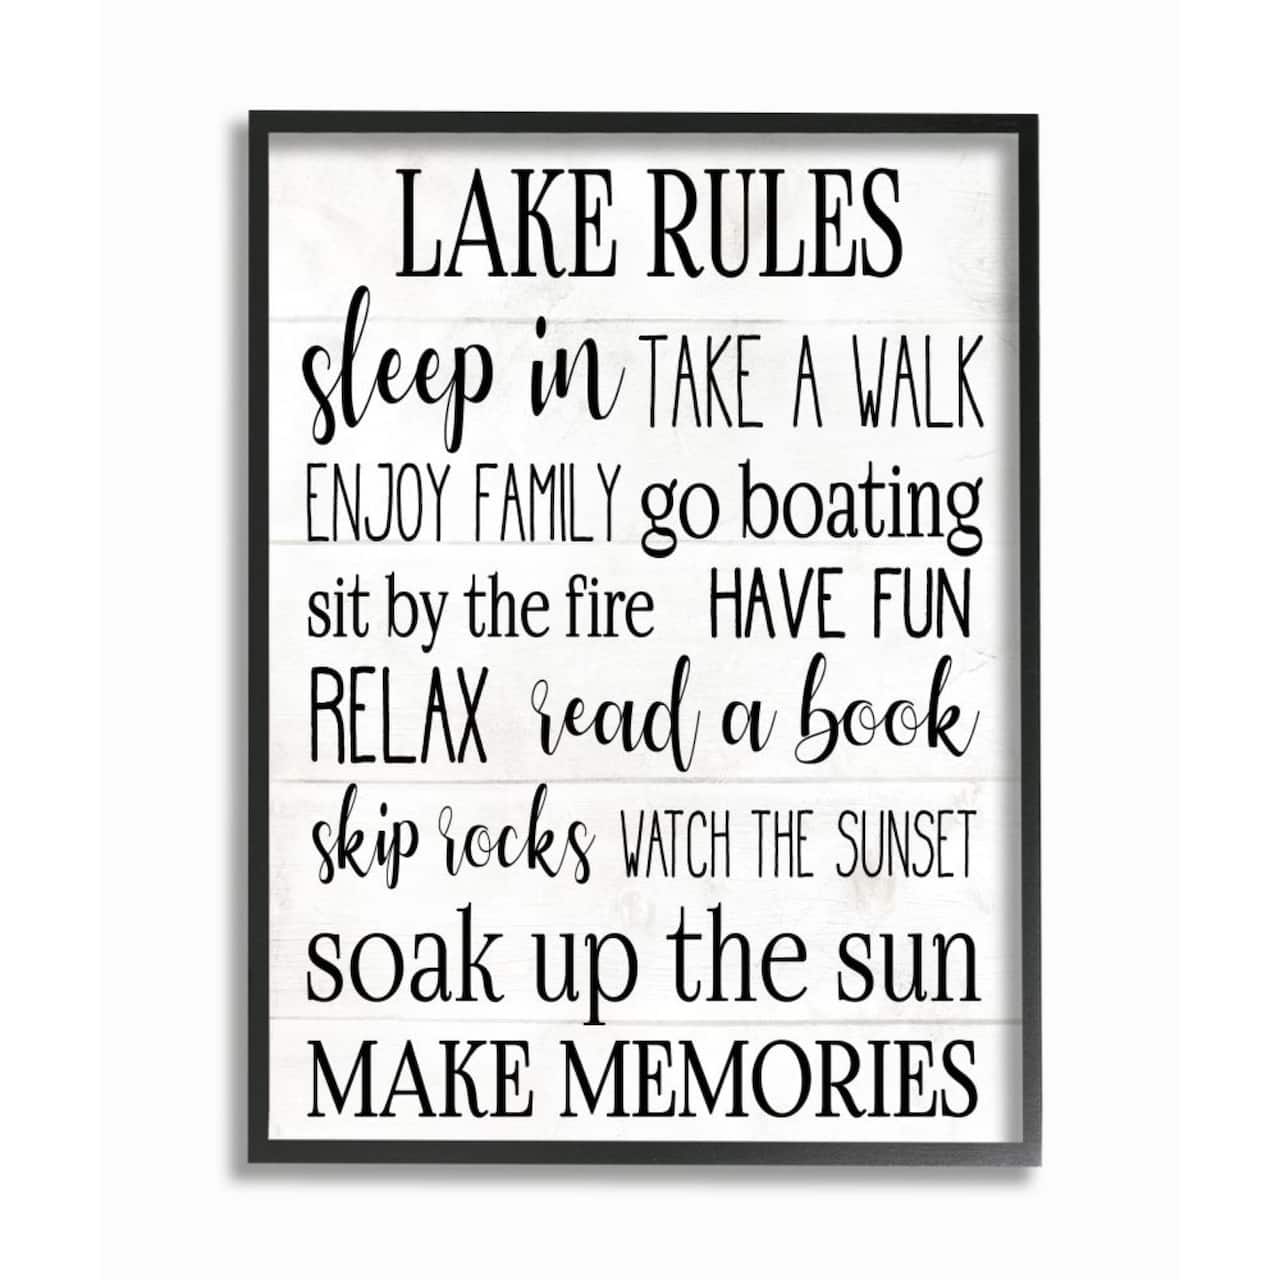 Stupell Industries Lake Rules Wall Art in Black Frame